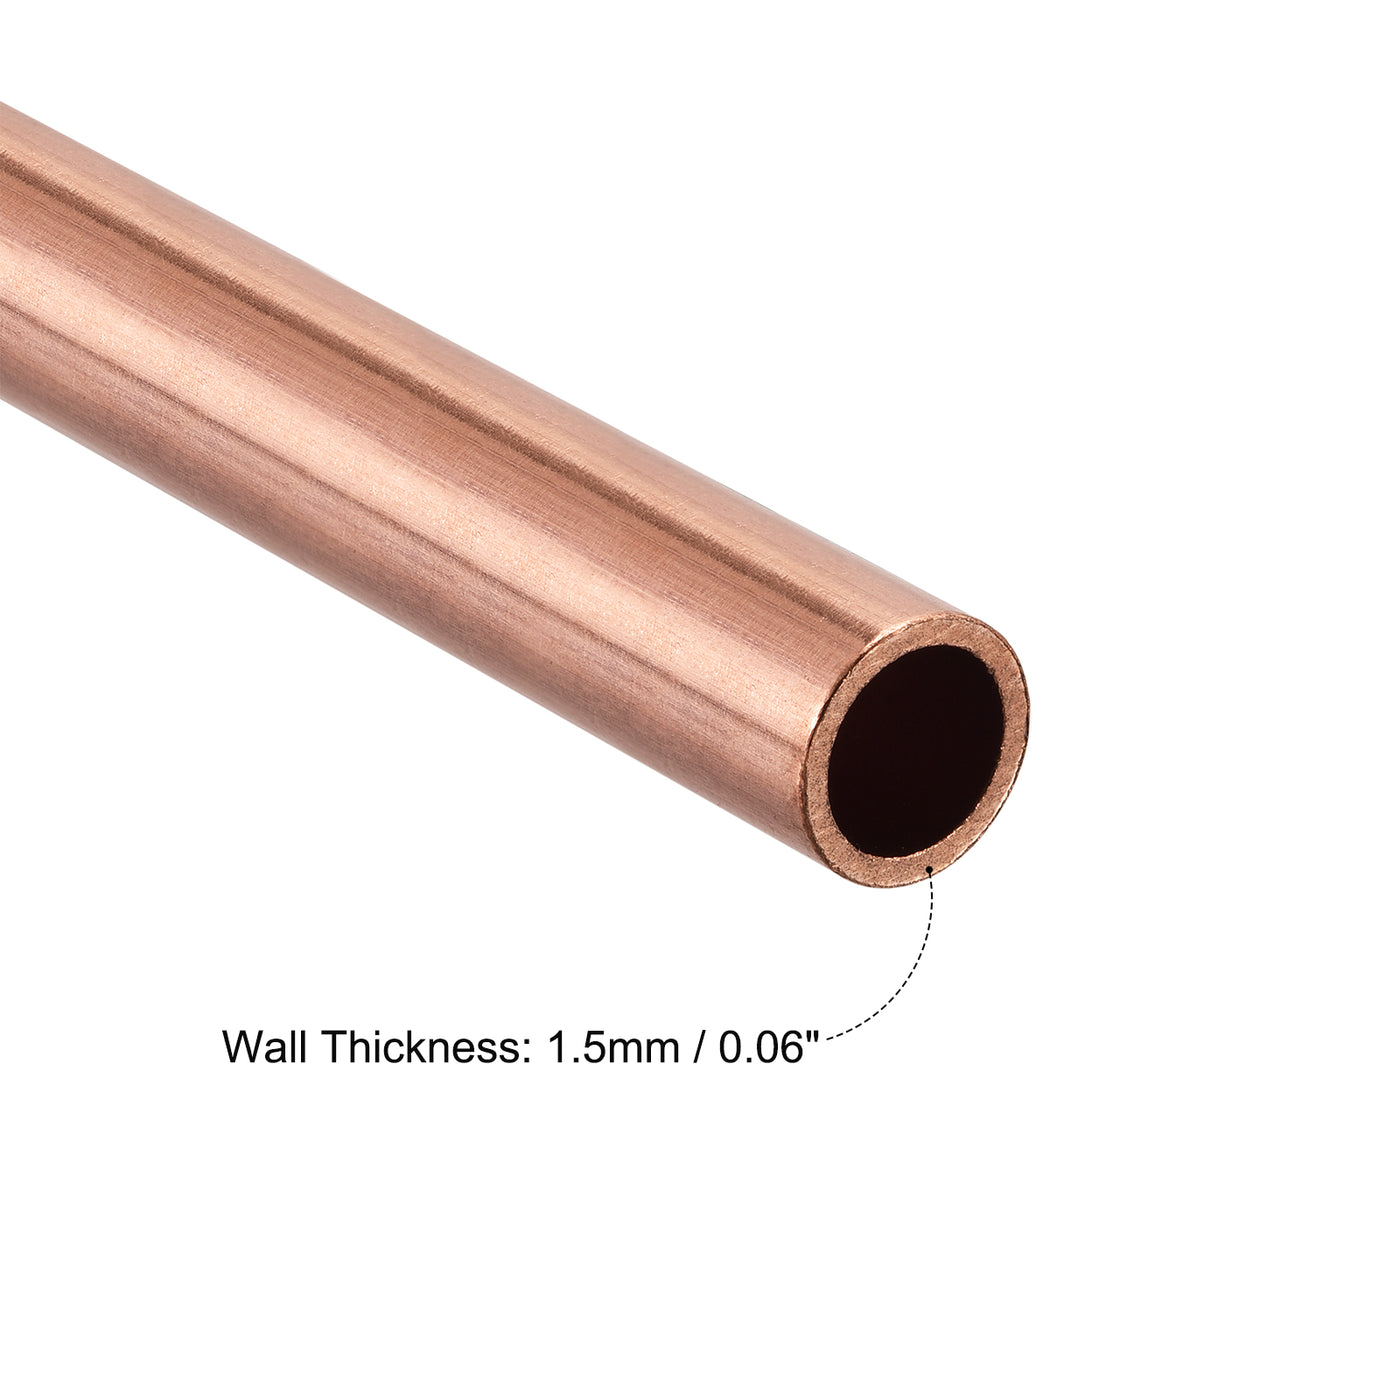 uxcell Uxcell Copper Round Tube 14mm OD 1.5mm Wall Thickness 100mm Length Pipe Tubing 2 Pcs